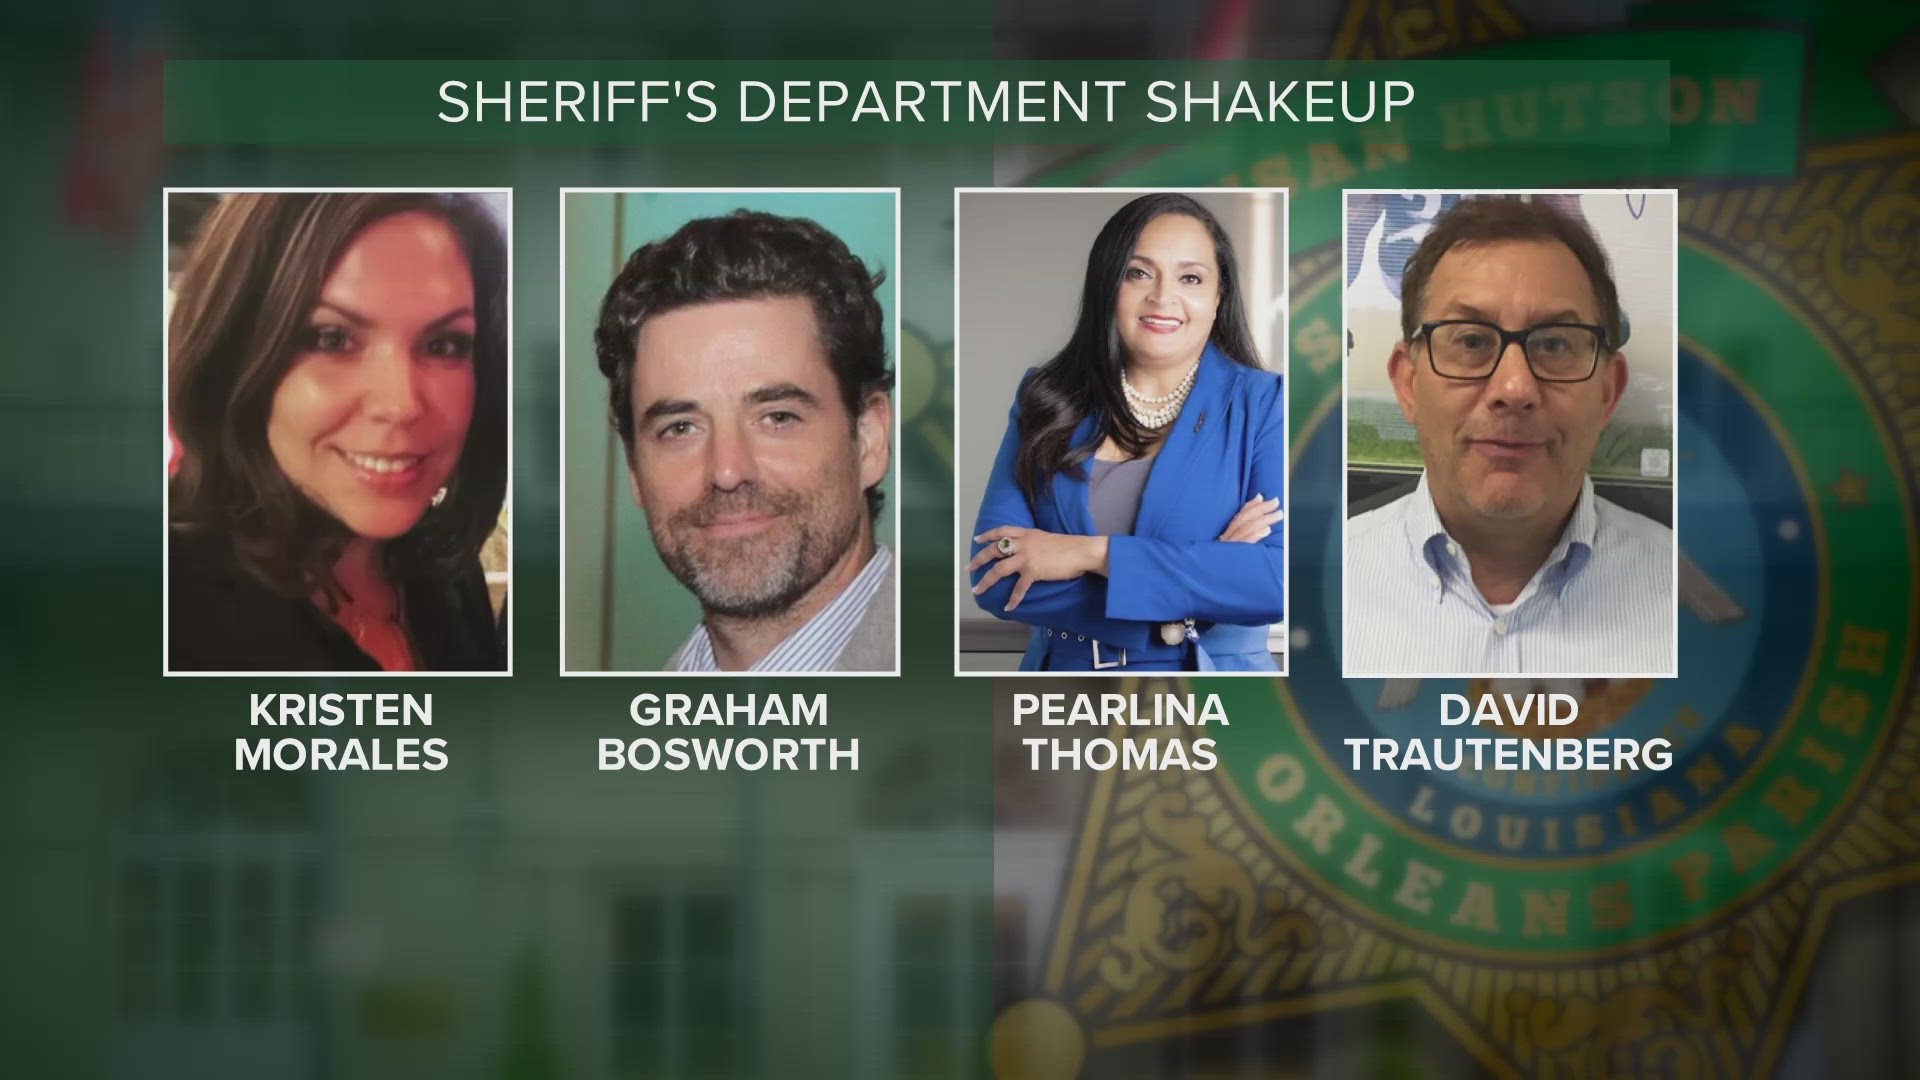 According to multiple sources, Sheriff Hutson summoned at least four top assistants into her office and gave them until Monday to resign or get fired.